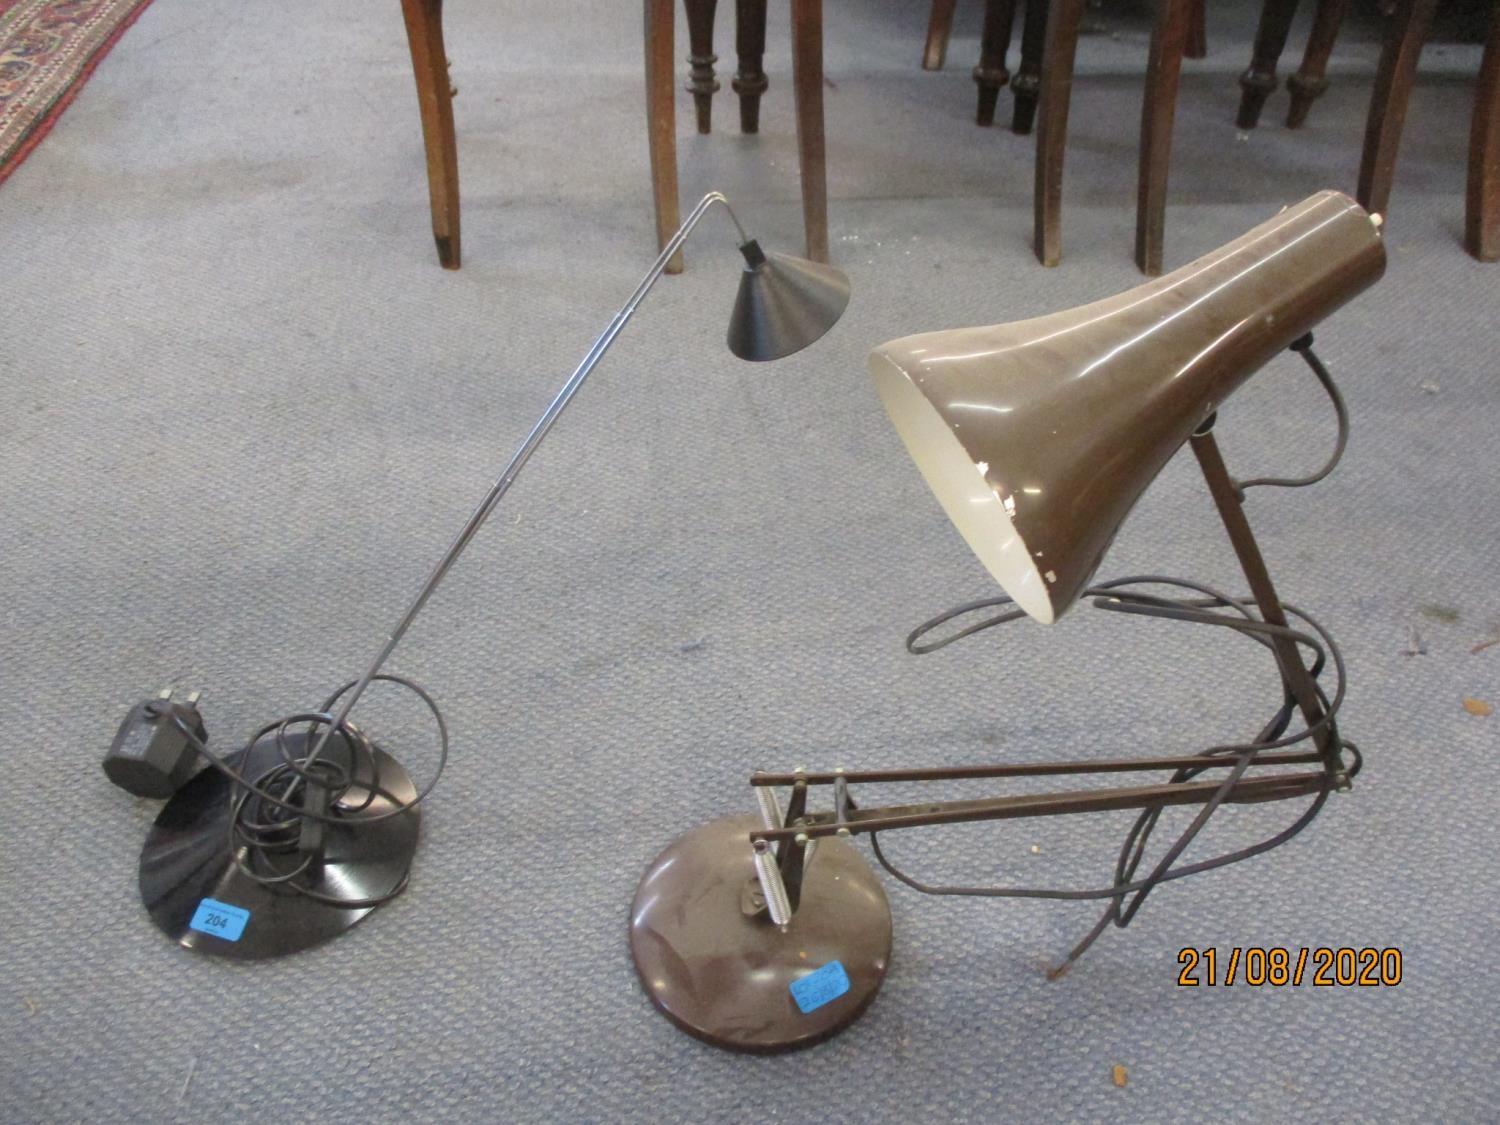 A Swiss Optelma reading light, together with a vintage brown enamelled anglepoise lamp